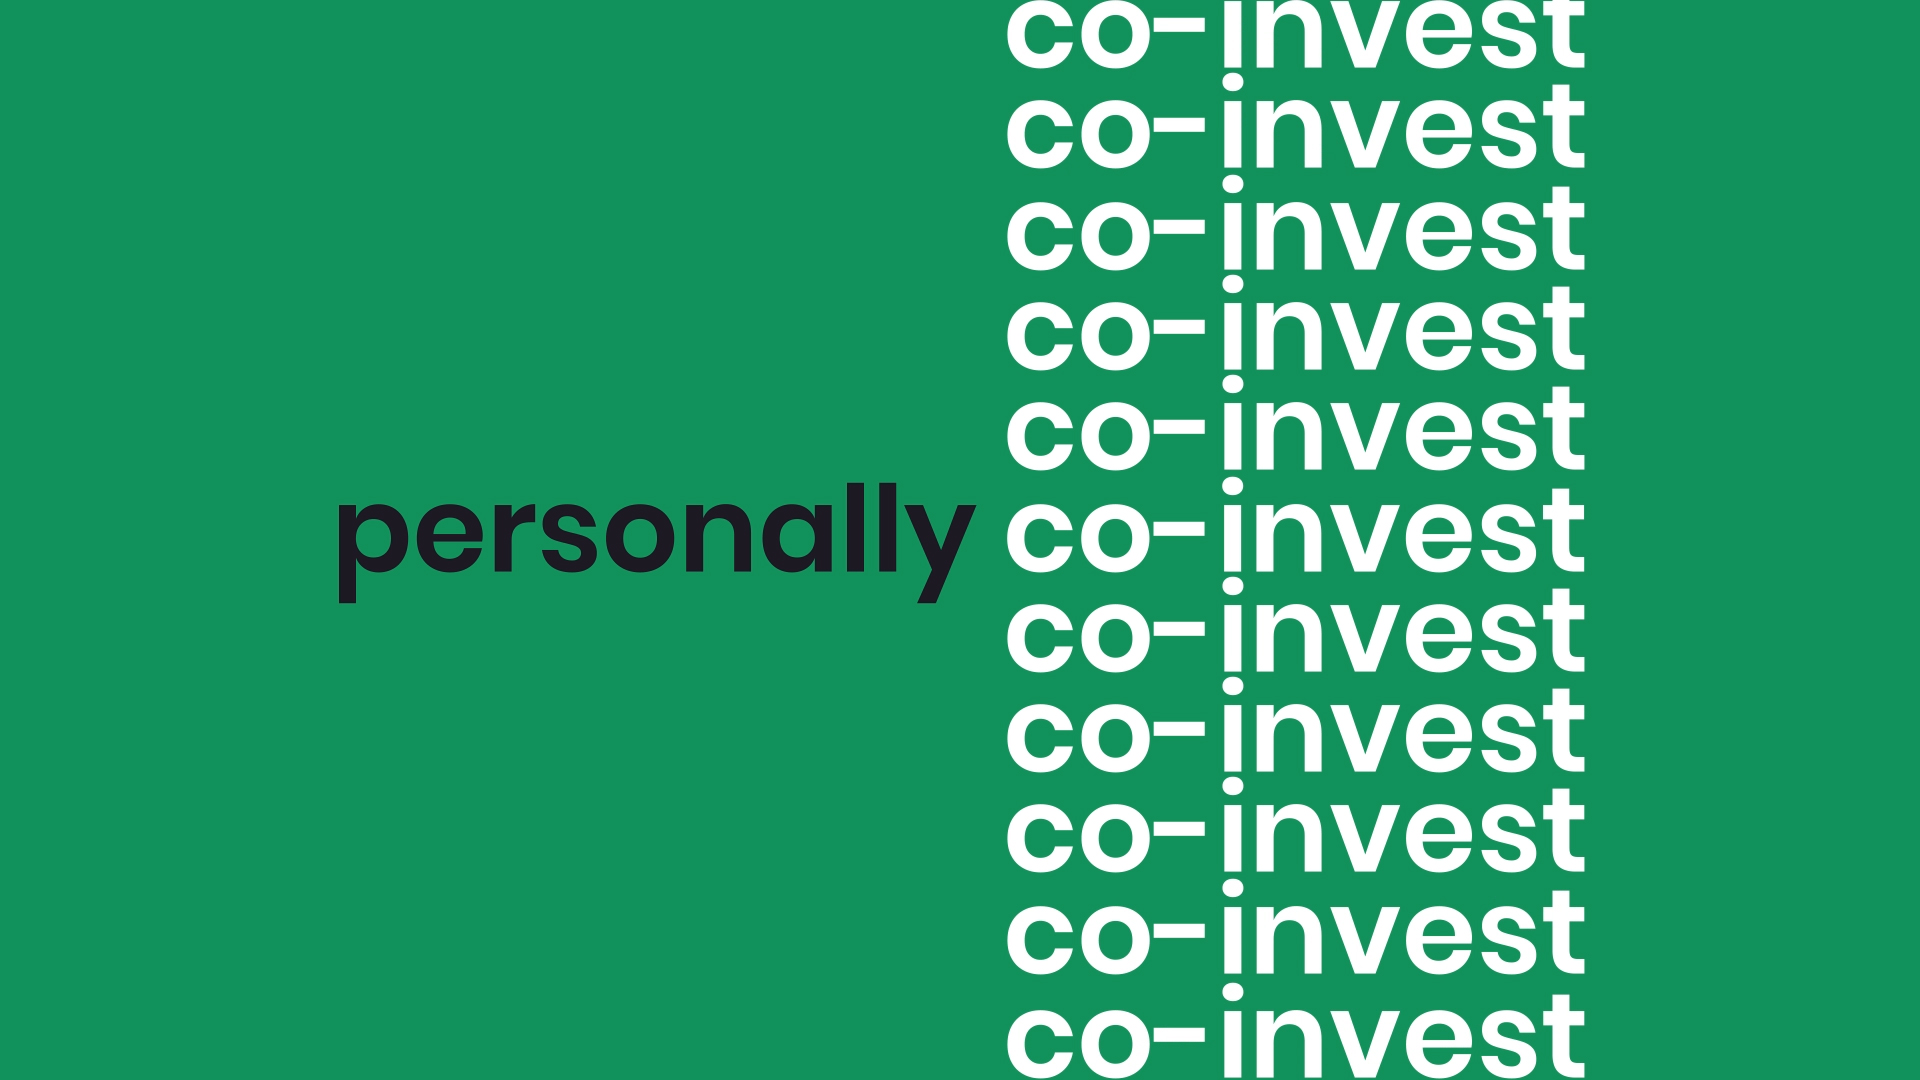 commerz ventures - personally - co-invest